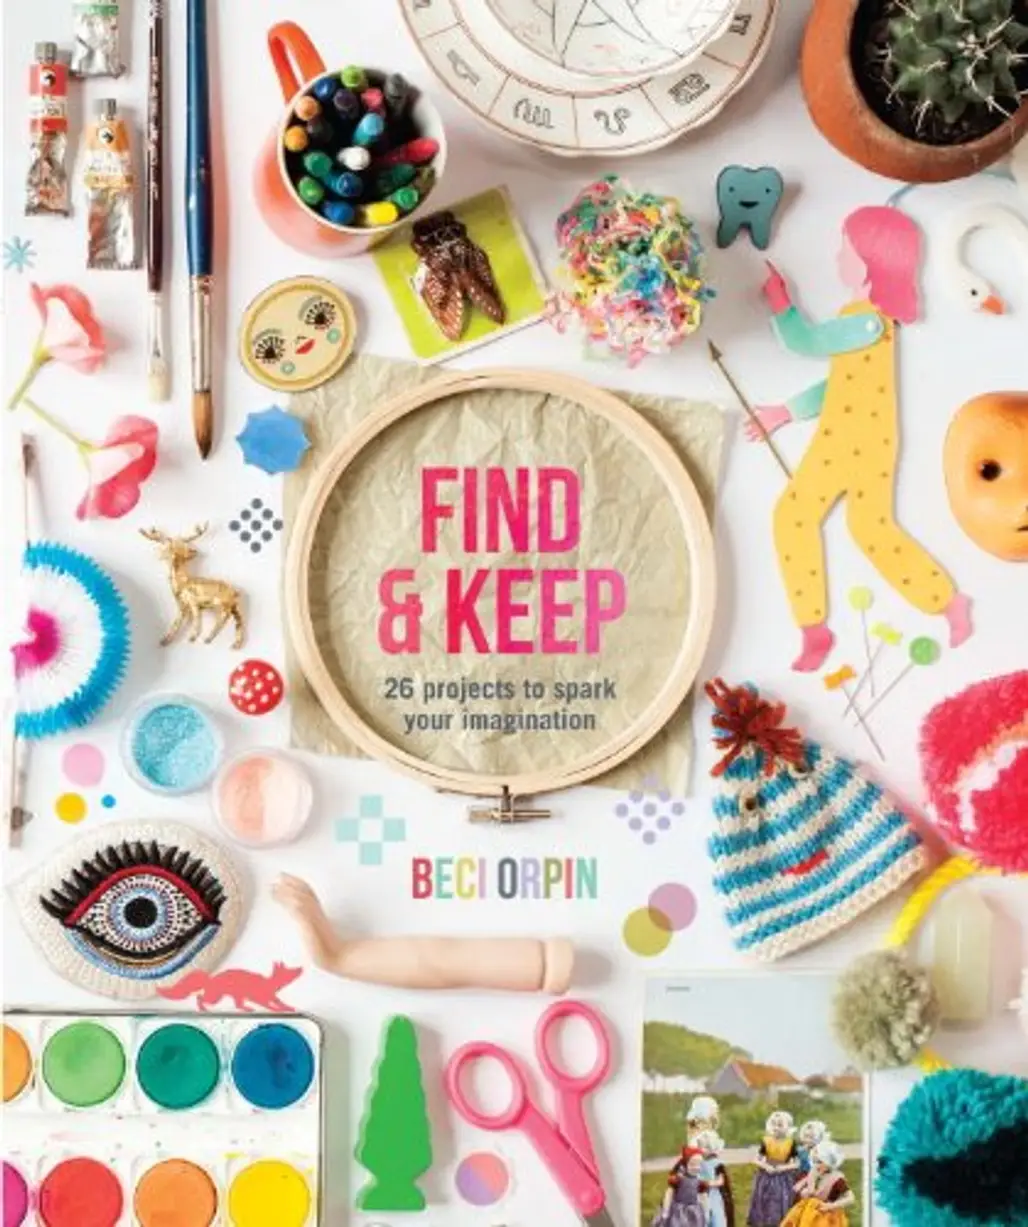 Find & Keep by Beci Orpin